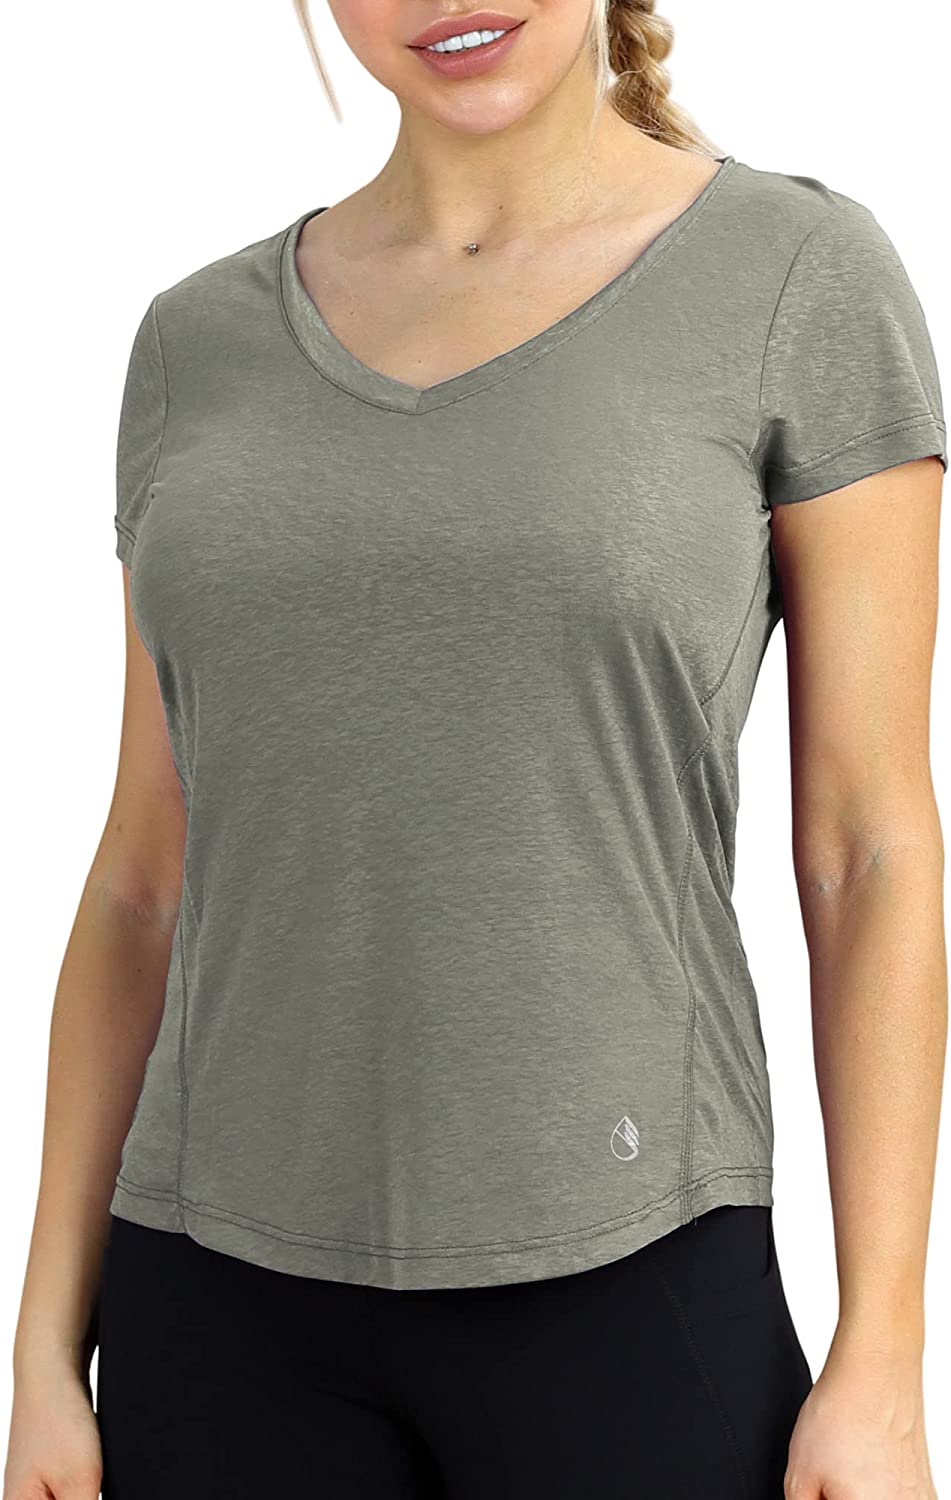 icyzone Workout Shirts for Women - Yoga Tops Gym Clothes Running